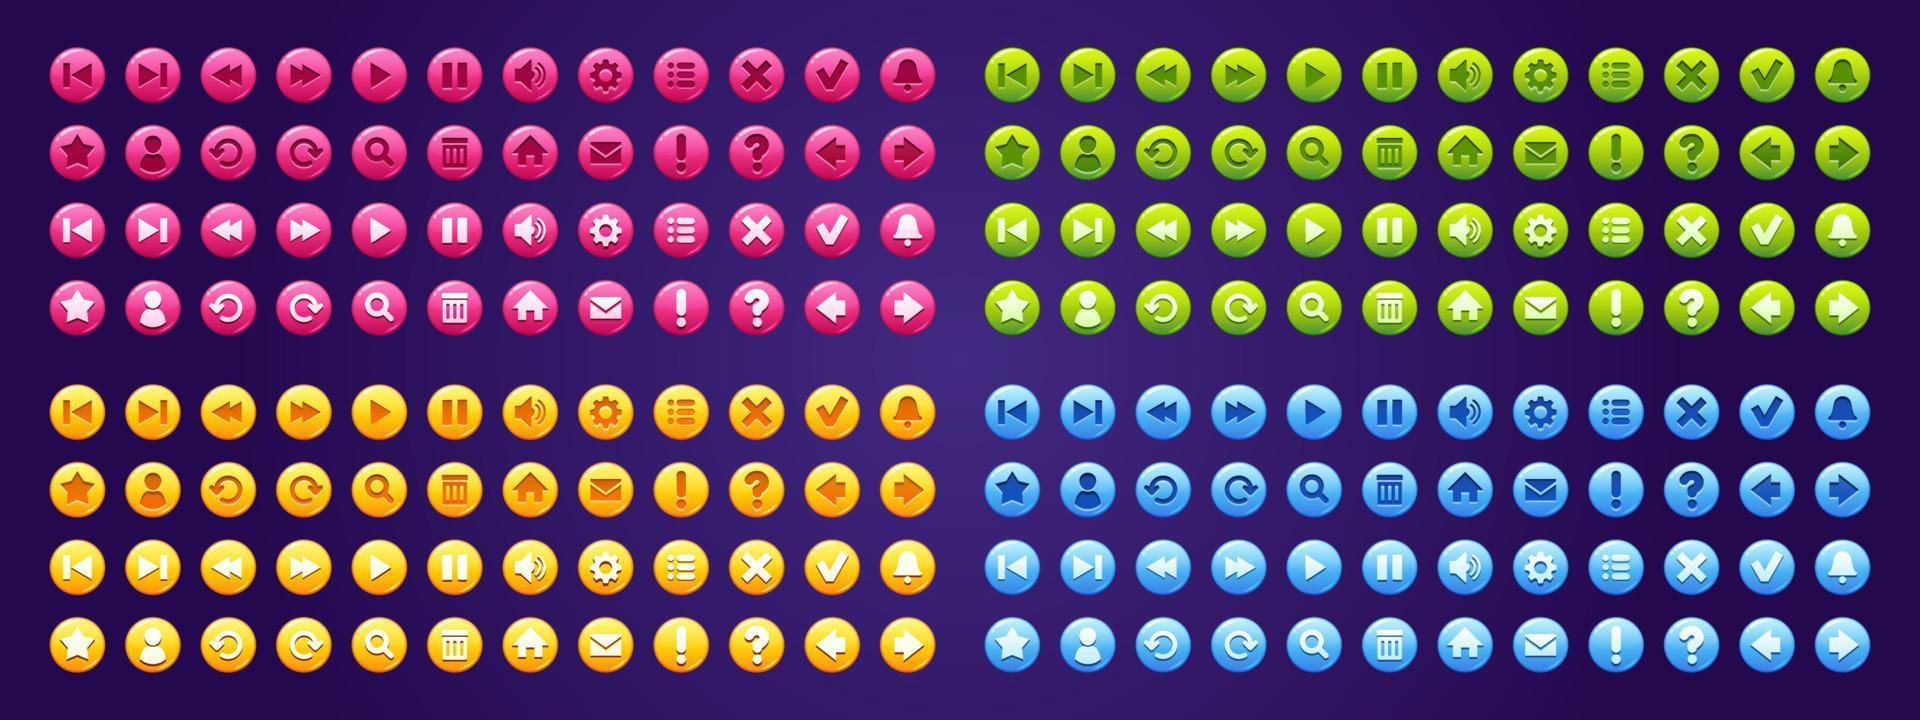 Set of buttons for game or app interface elements vector